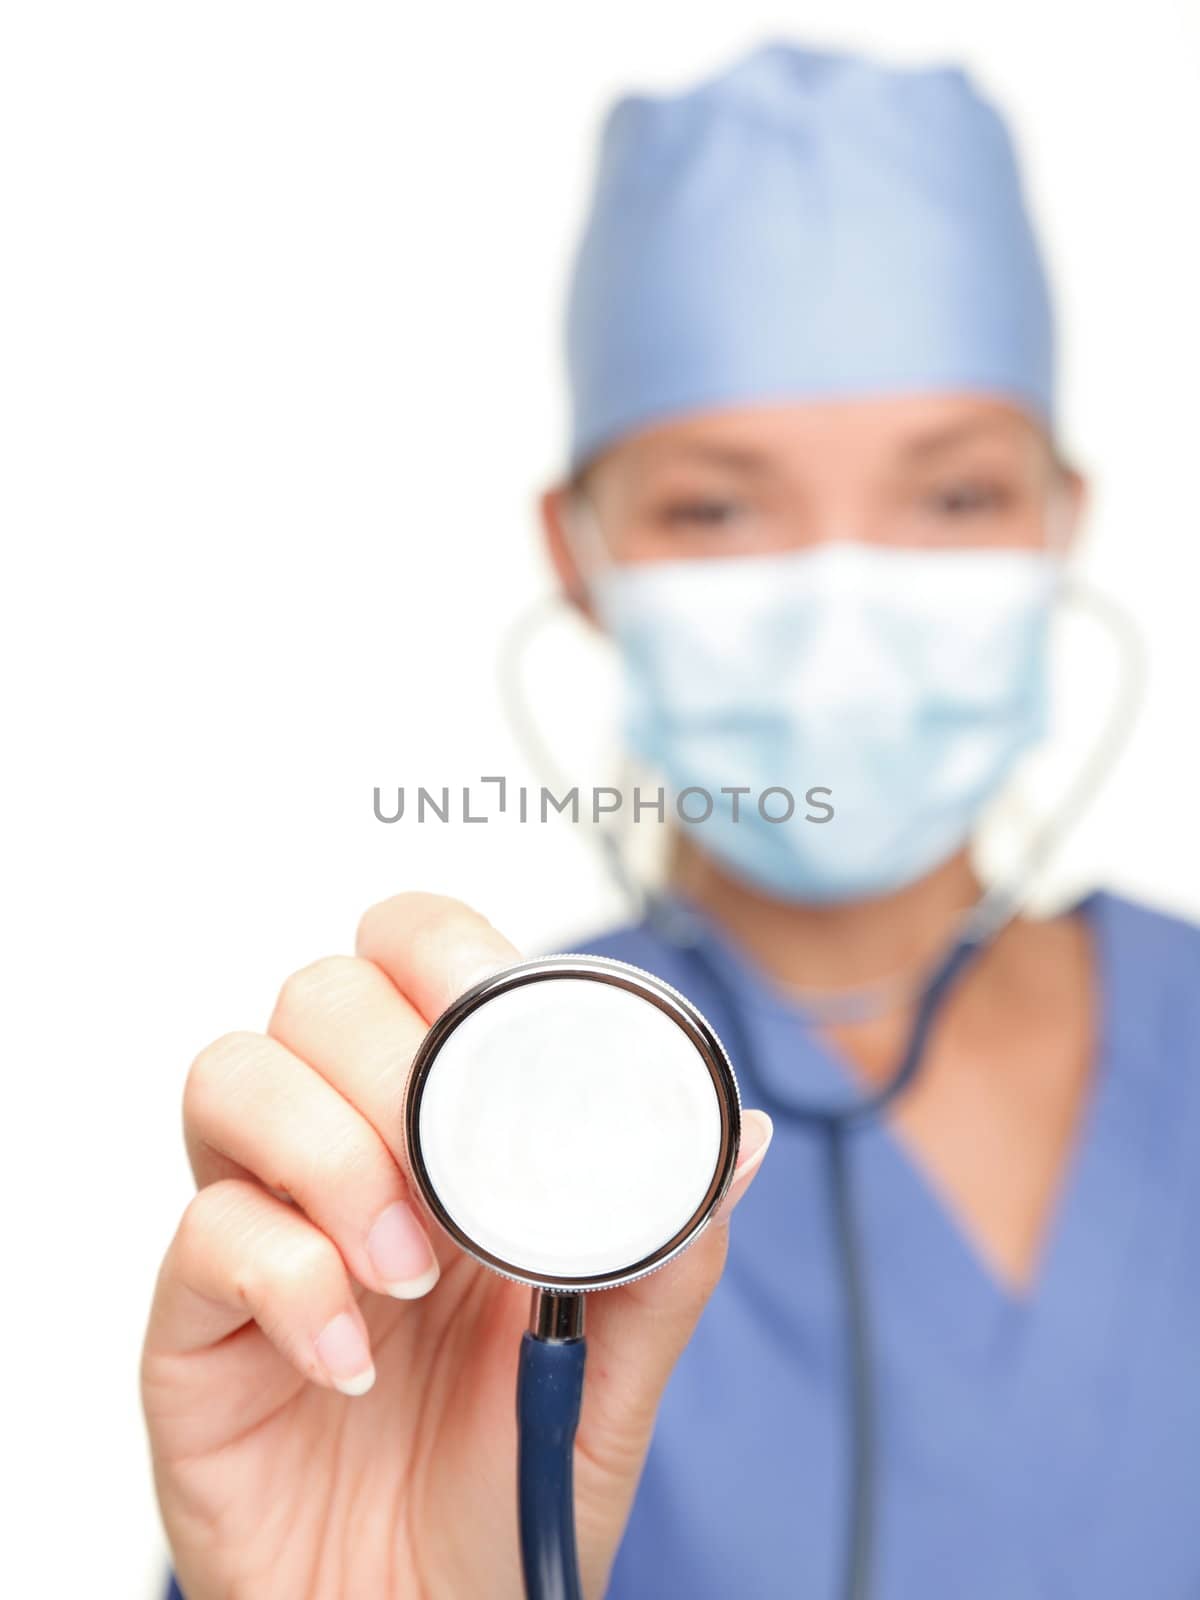 Medical doctor showing stethoscope close up isolated on white background. Female nurse or doctor wearing surgical mask and hat. Woman model.